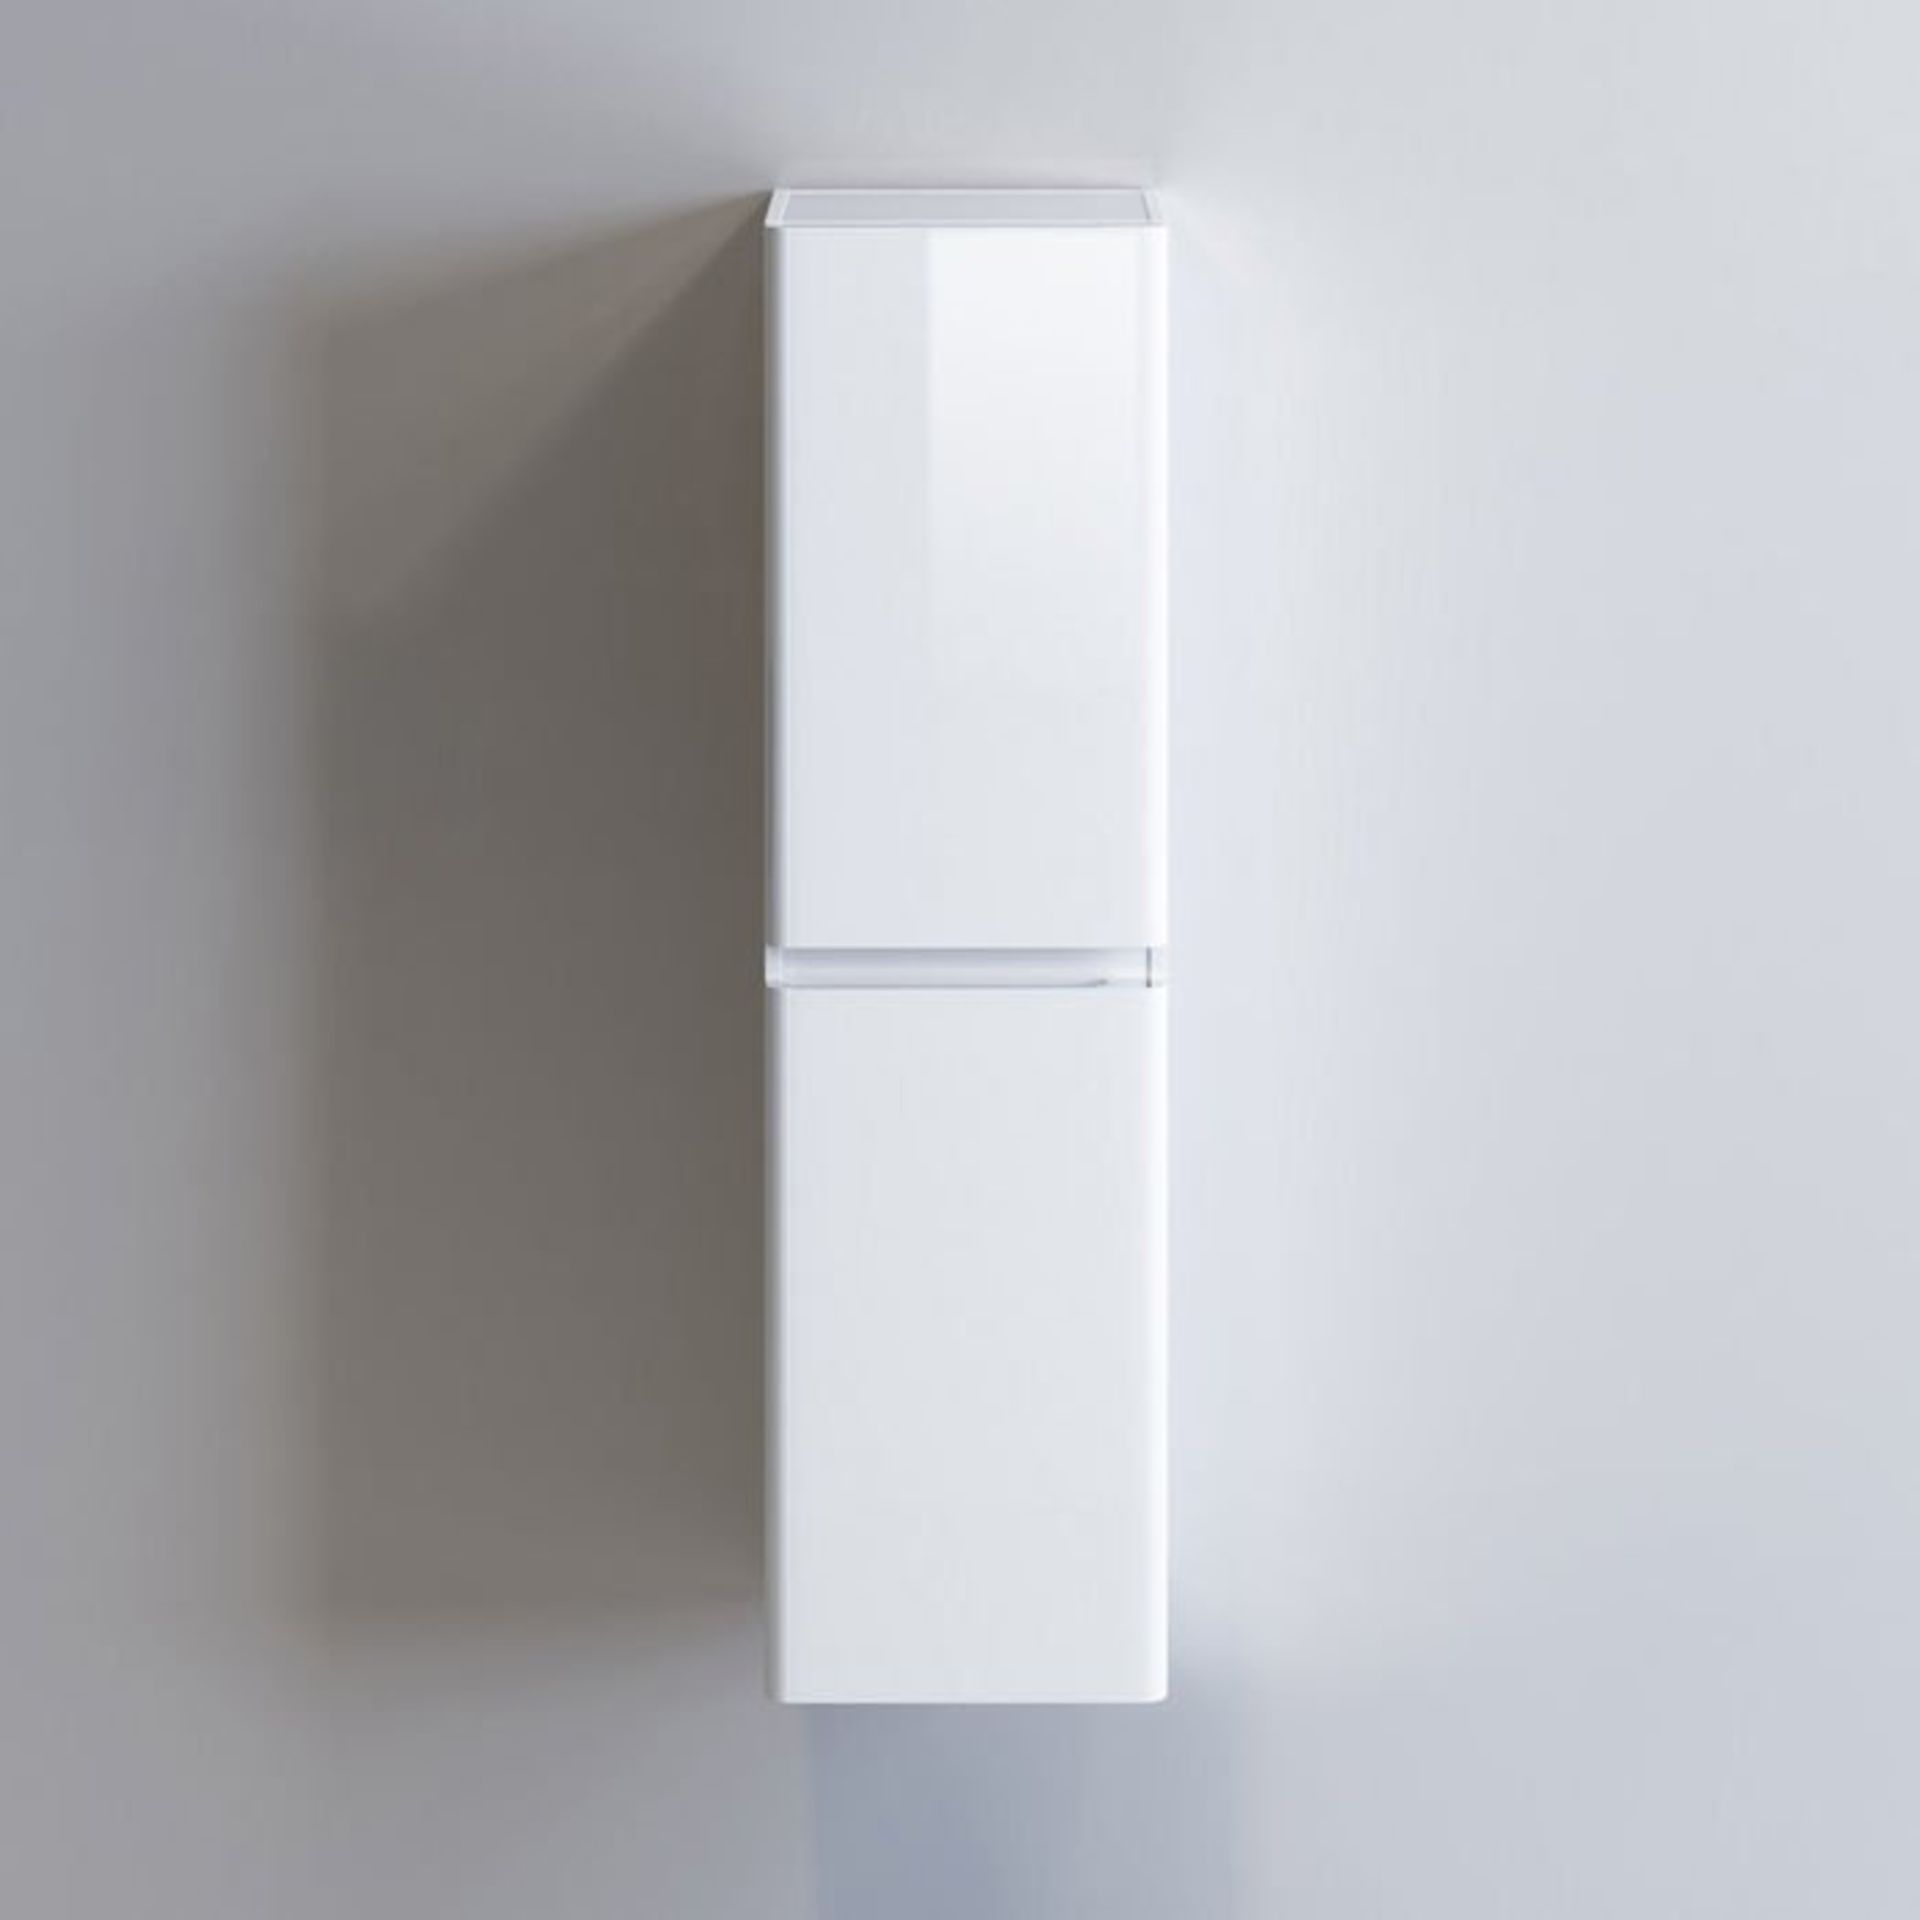 (G68) 1400mm Denver II Gloss White Tall Storage Cabinet - Wall Hung RRP £144.99 Great practical - Image 6 of 6